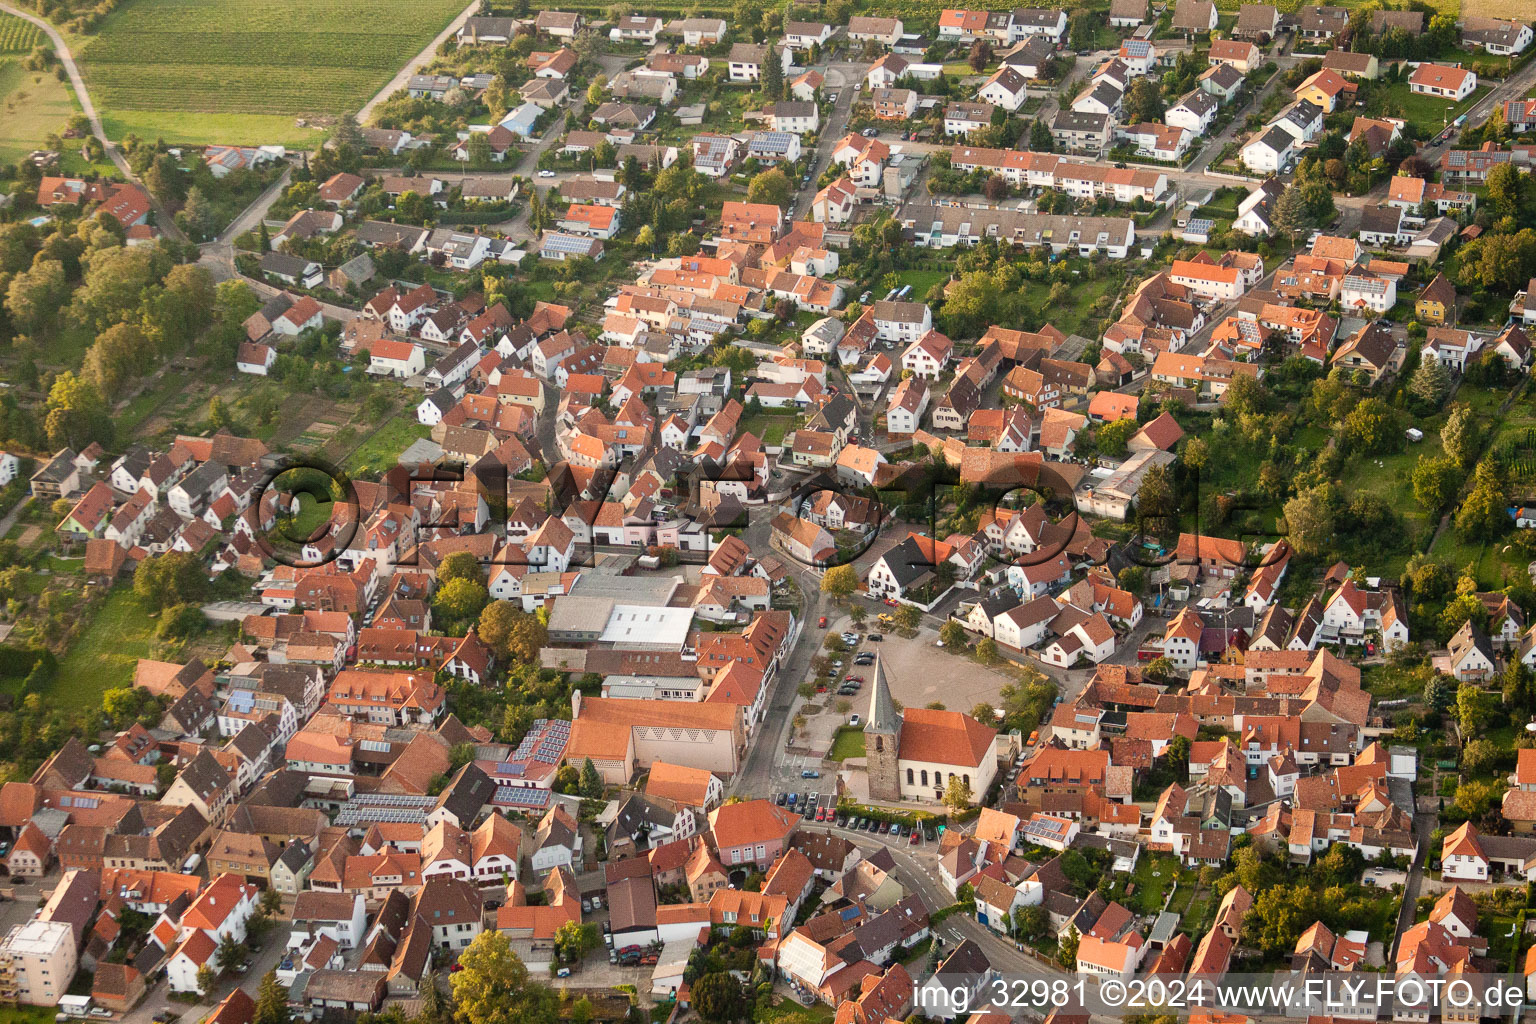 Town View of the streets and houses of the residential areas in the district Godramstein in Landau in der Pfalz in the state Rhineland-Palatinate